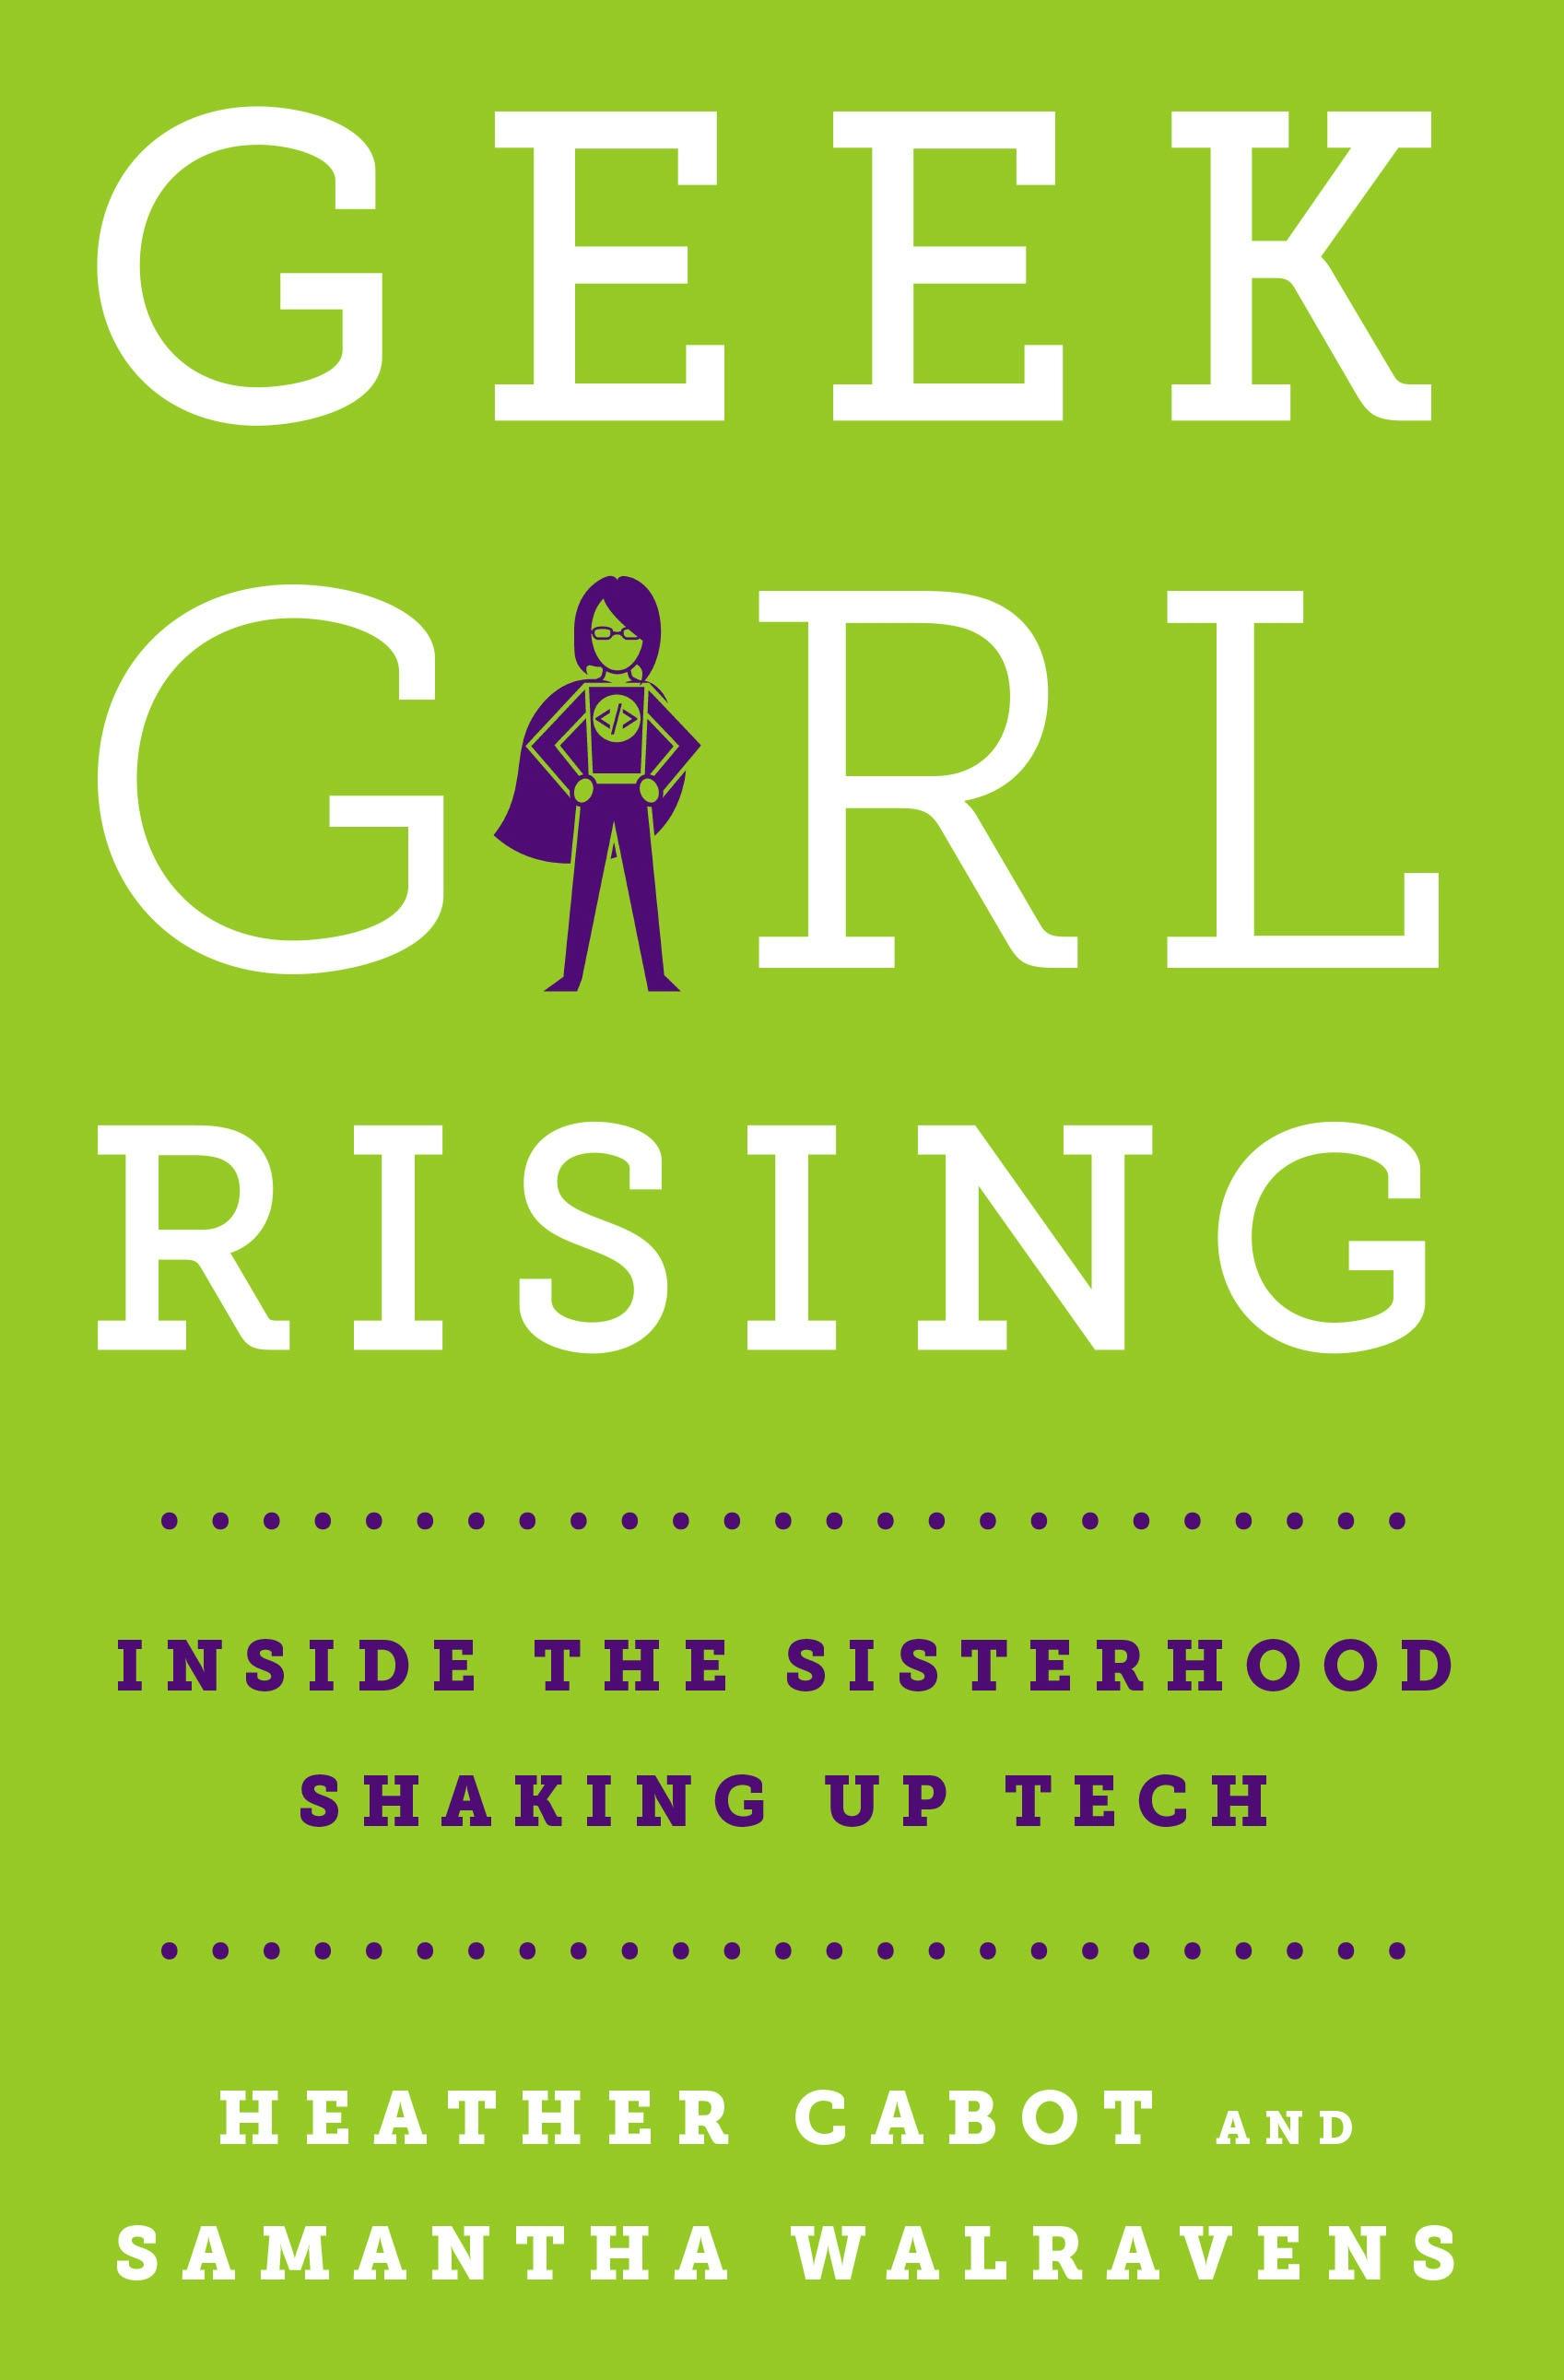 Describes for Geek Girl Rising by authors